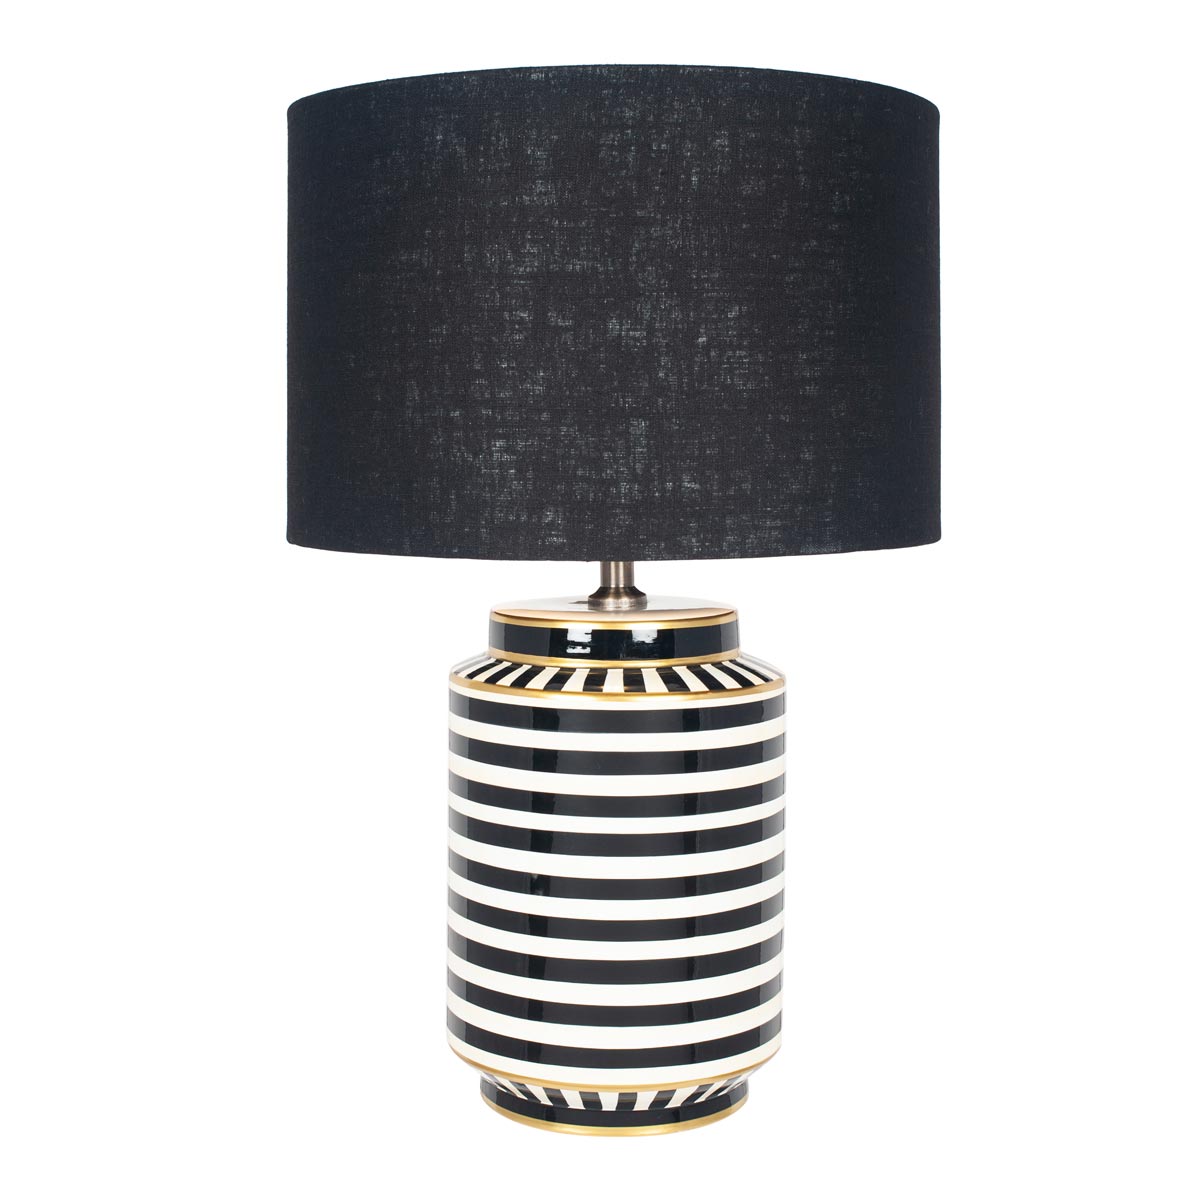 Black and white table lamp with black cylinder lampshade